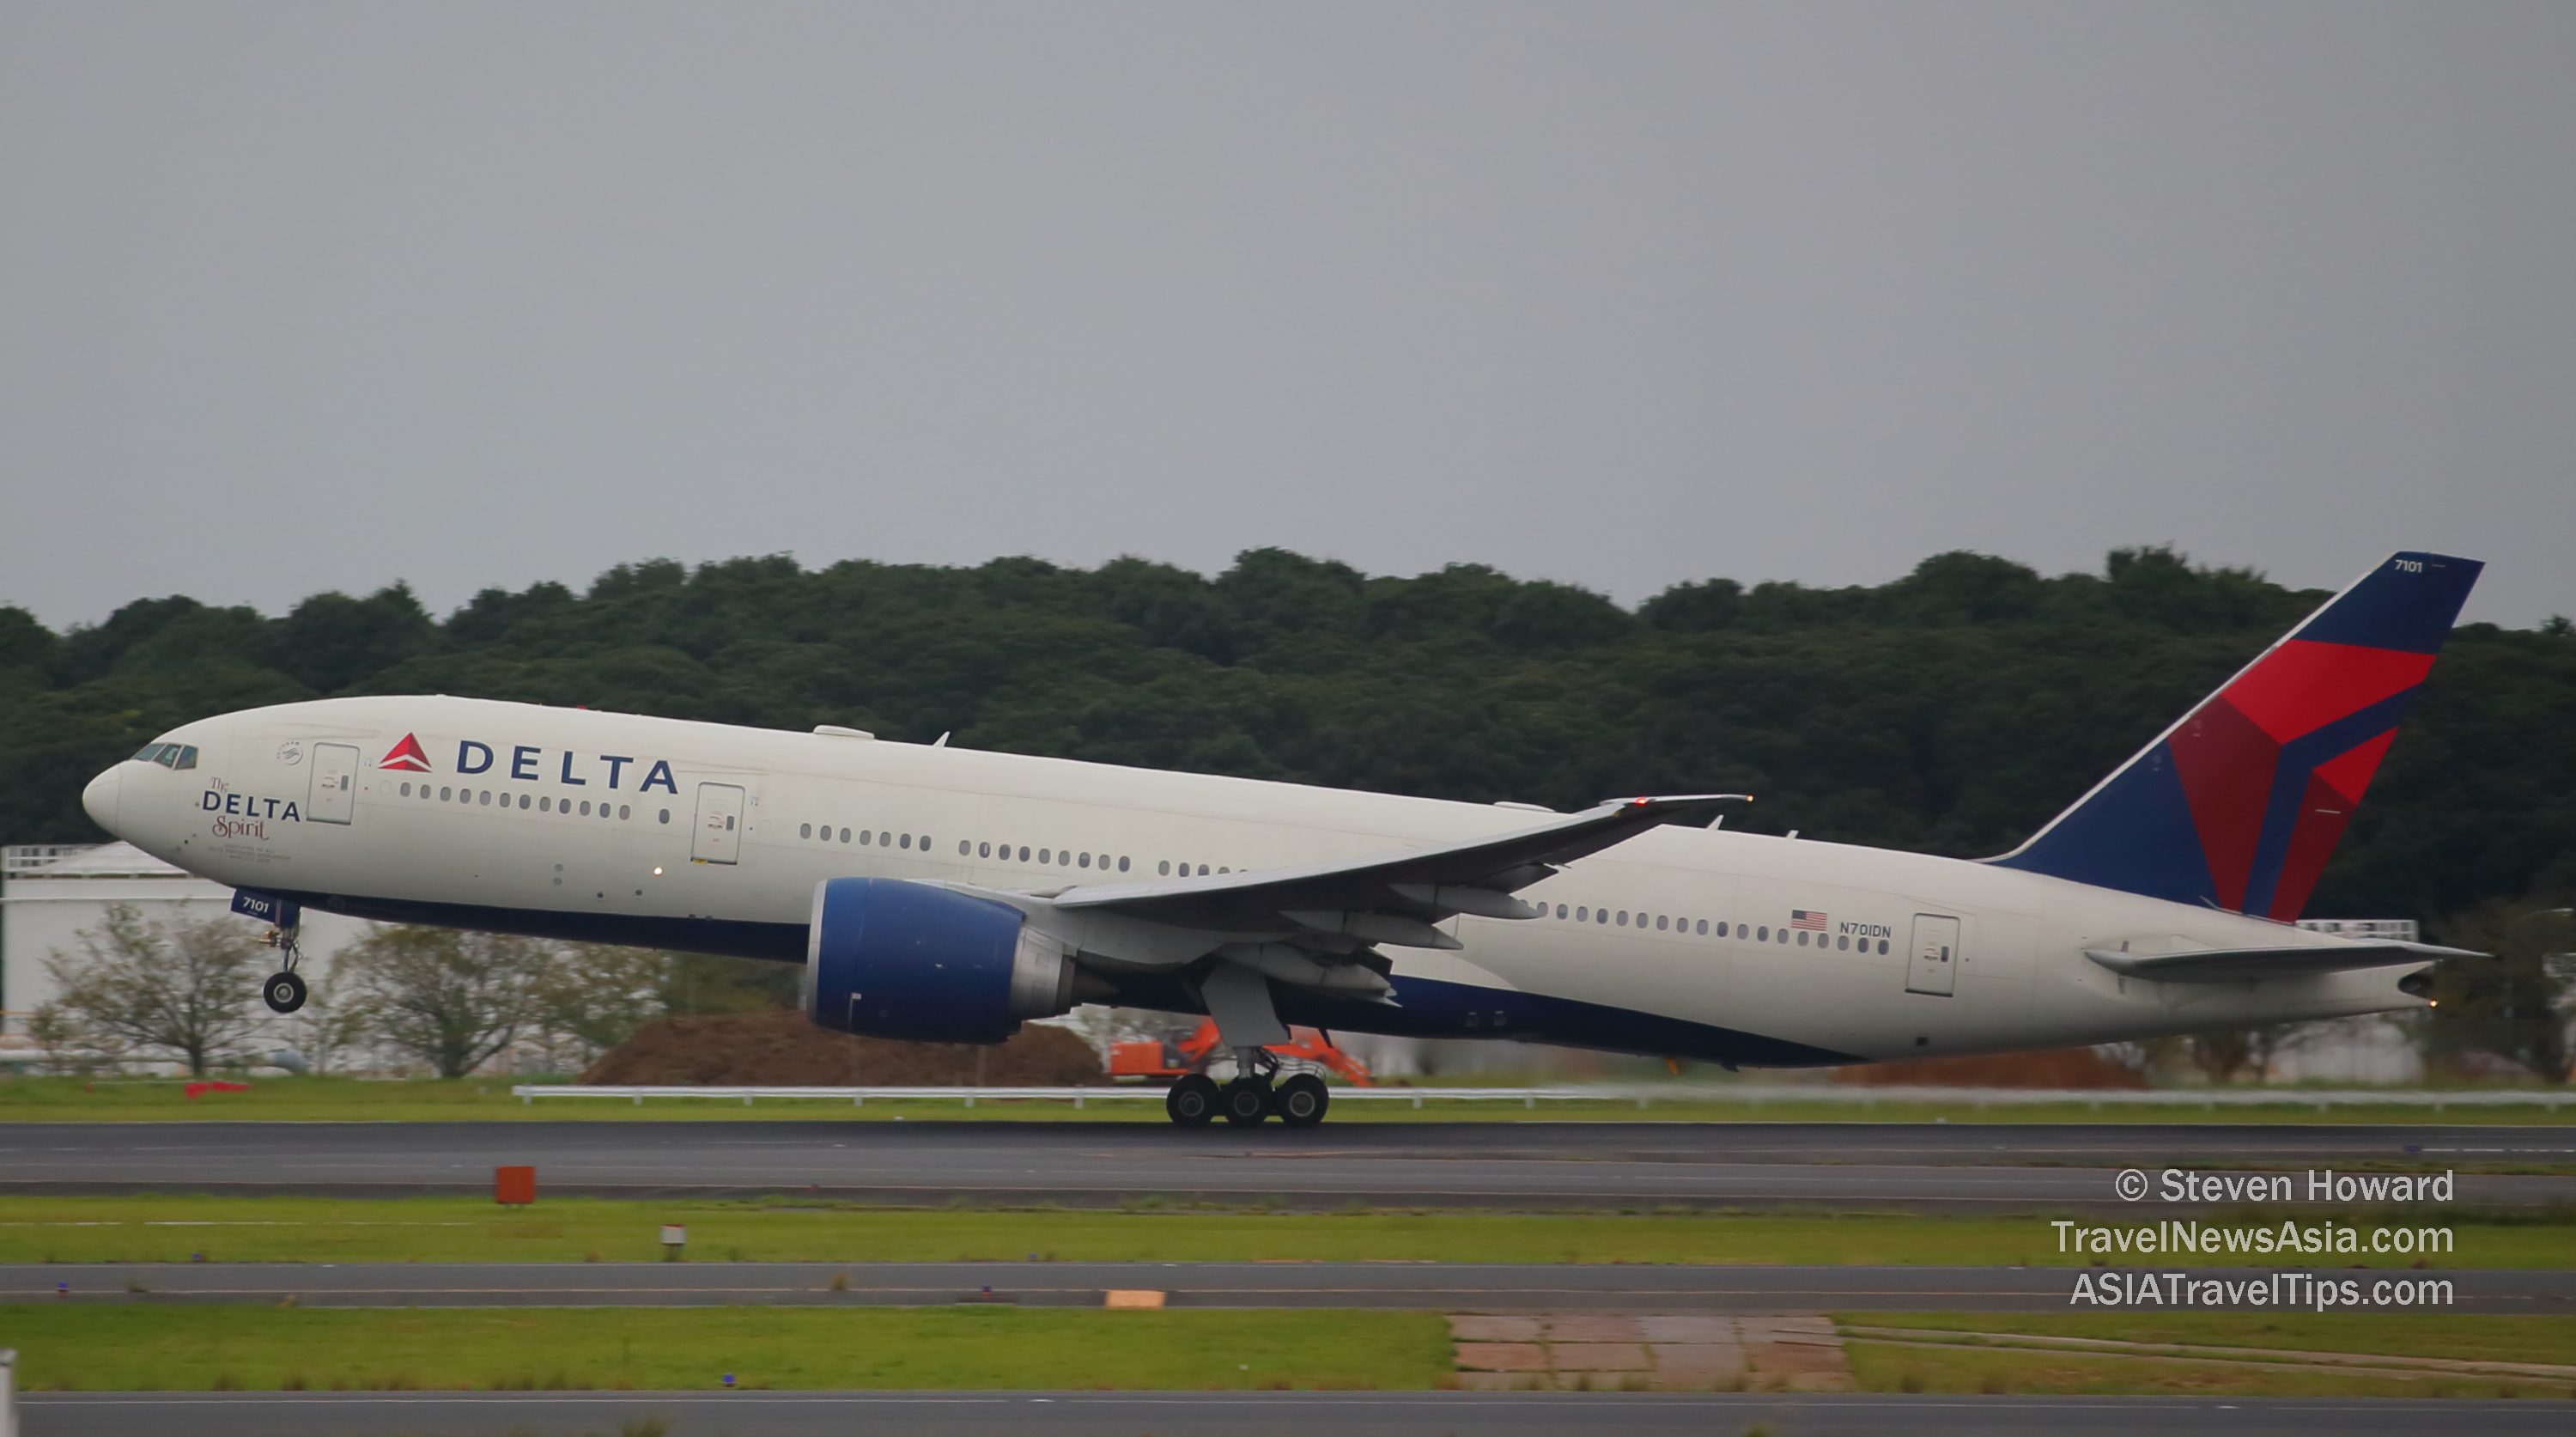 Delta Boeing 777. Picture by Steven Howard of TravelNewsAsia.com. Click to enlarge.